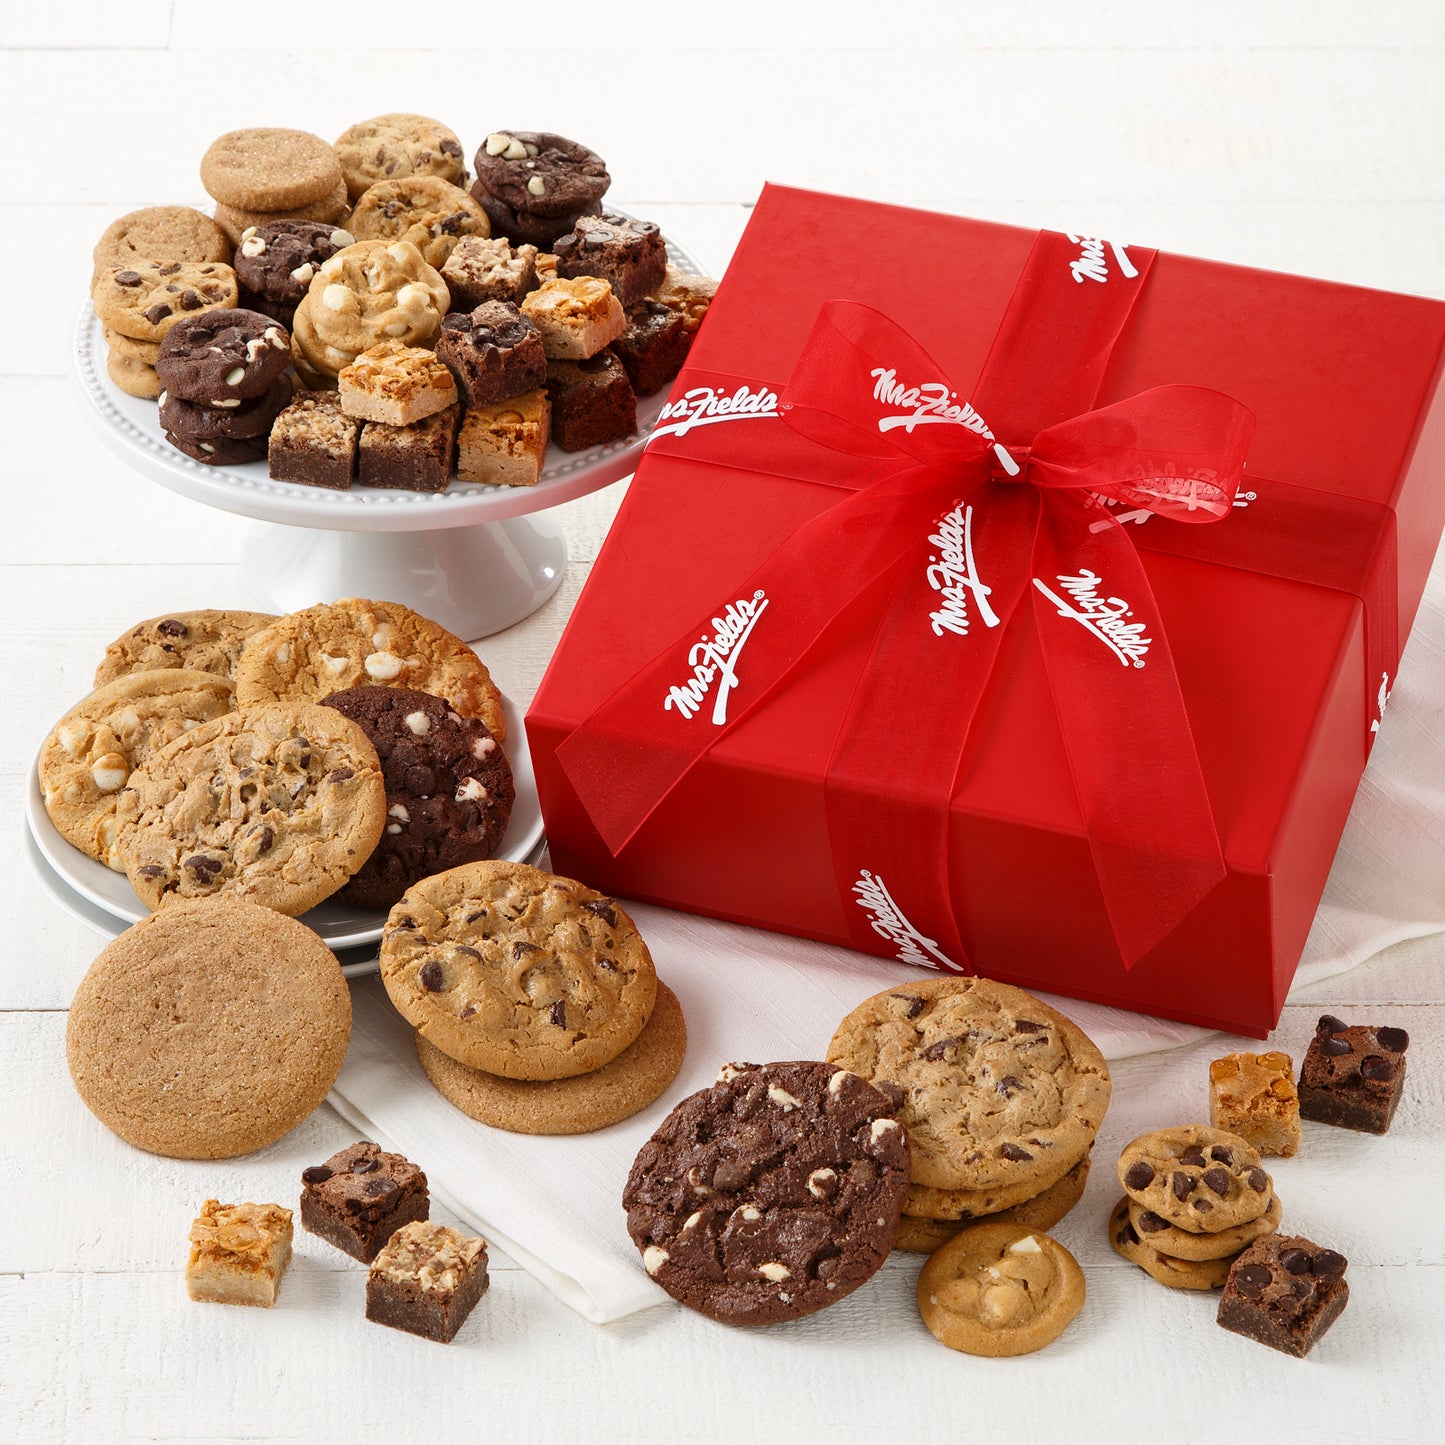 A red gift box tied with a red Mrs. Fields ribbon and surrounded by an assortment of Nibblers®, original cookies, and brownie bites